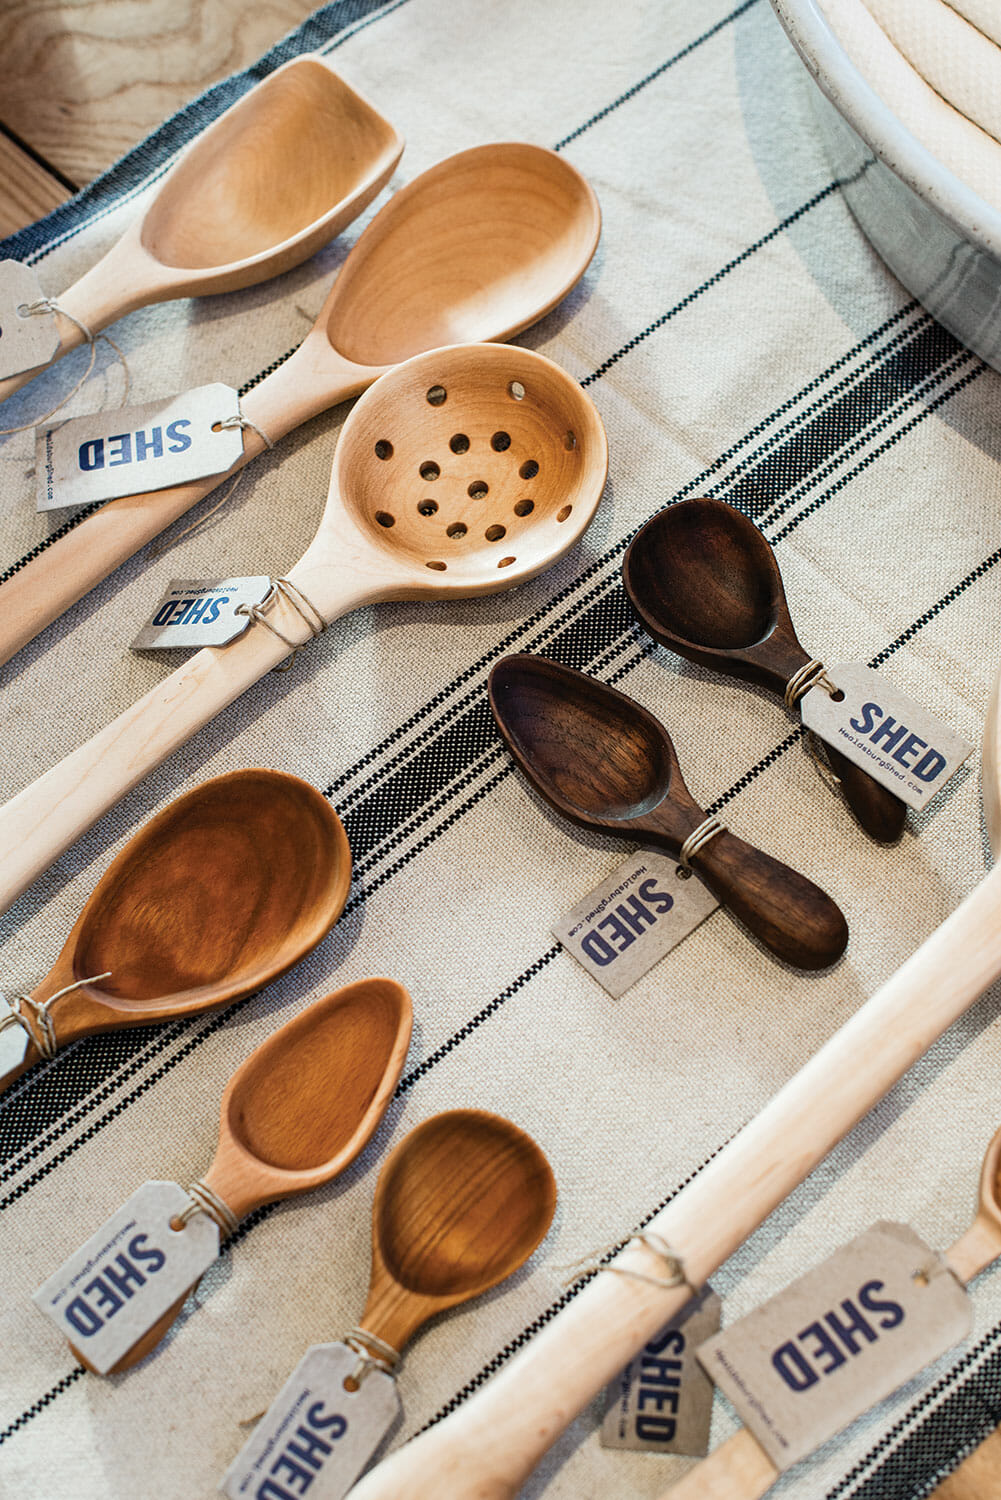 The housewares section focuses on handcrafted tools, such as these hardwood spoons and scoops made by a California woodworker.